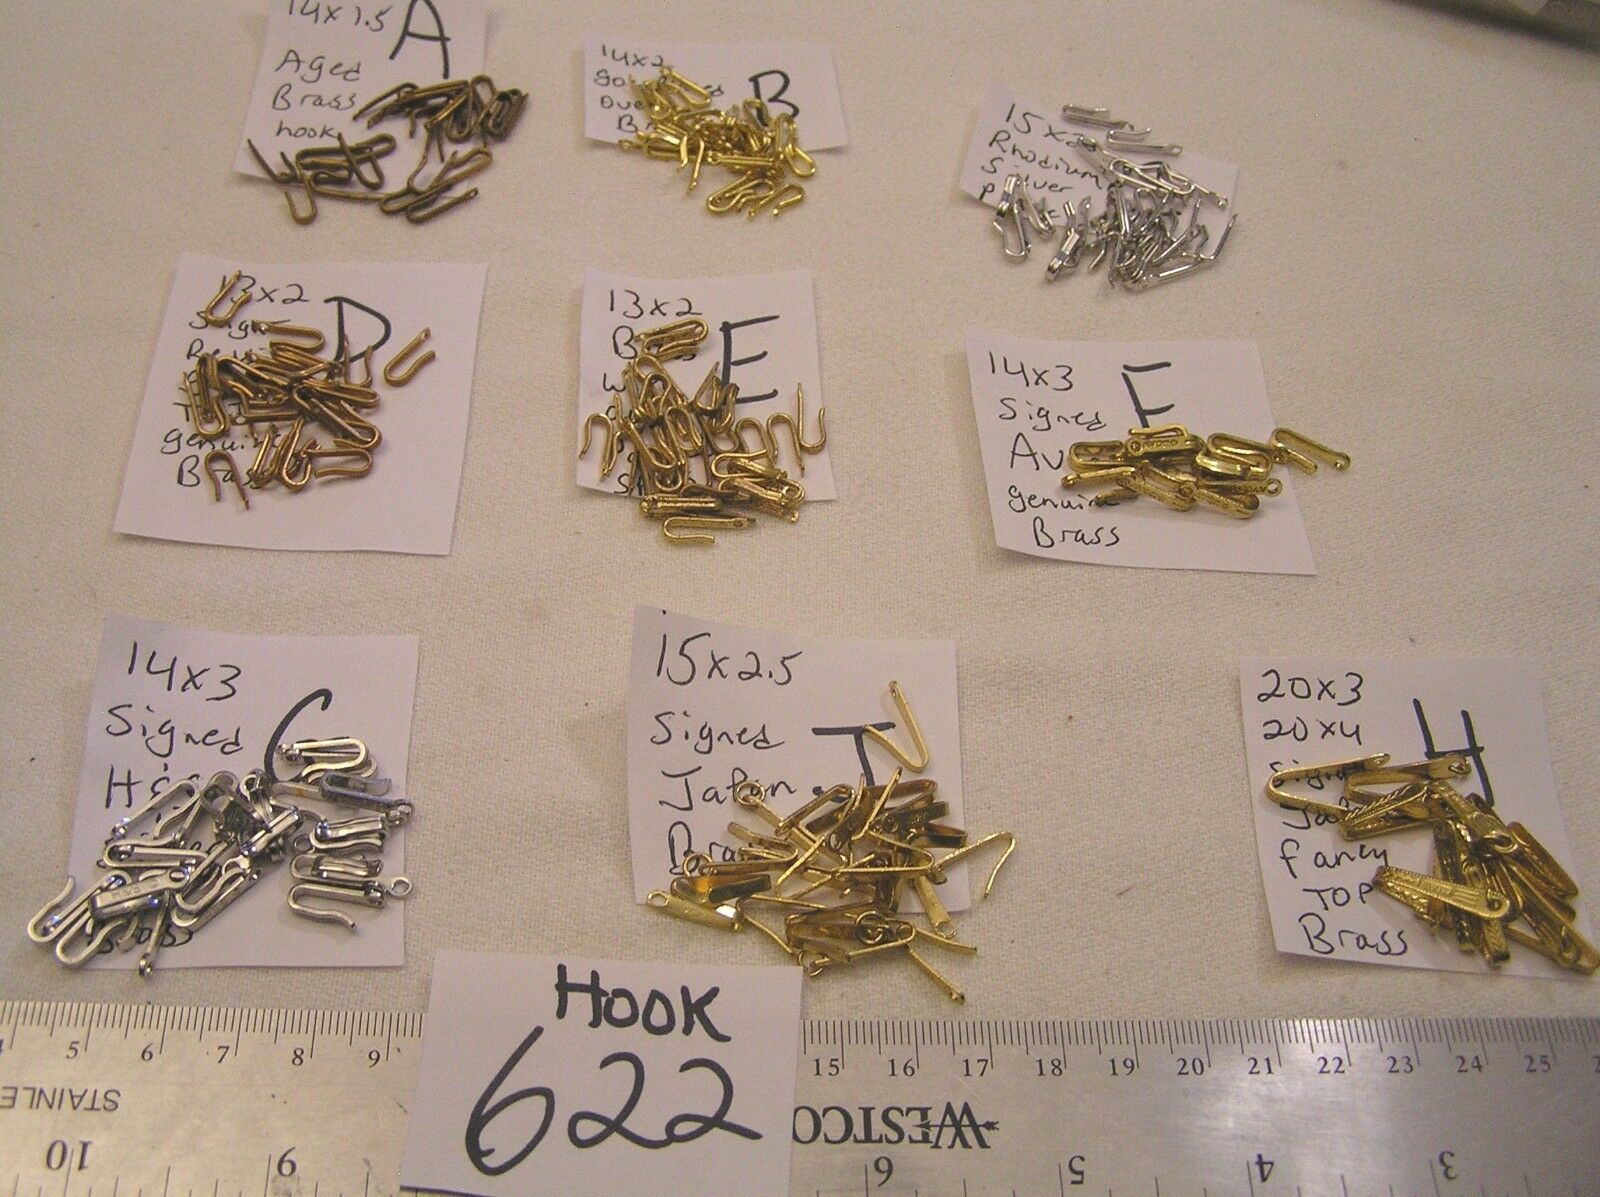 Vtg Quality Hook Clasp Jewelry Findings Repair Craft Necklace Lot Brass Silver +